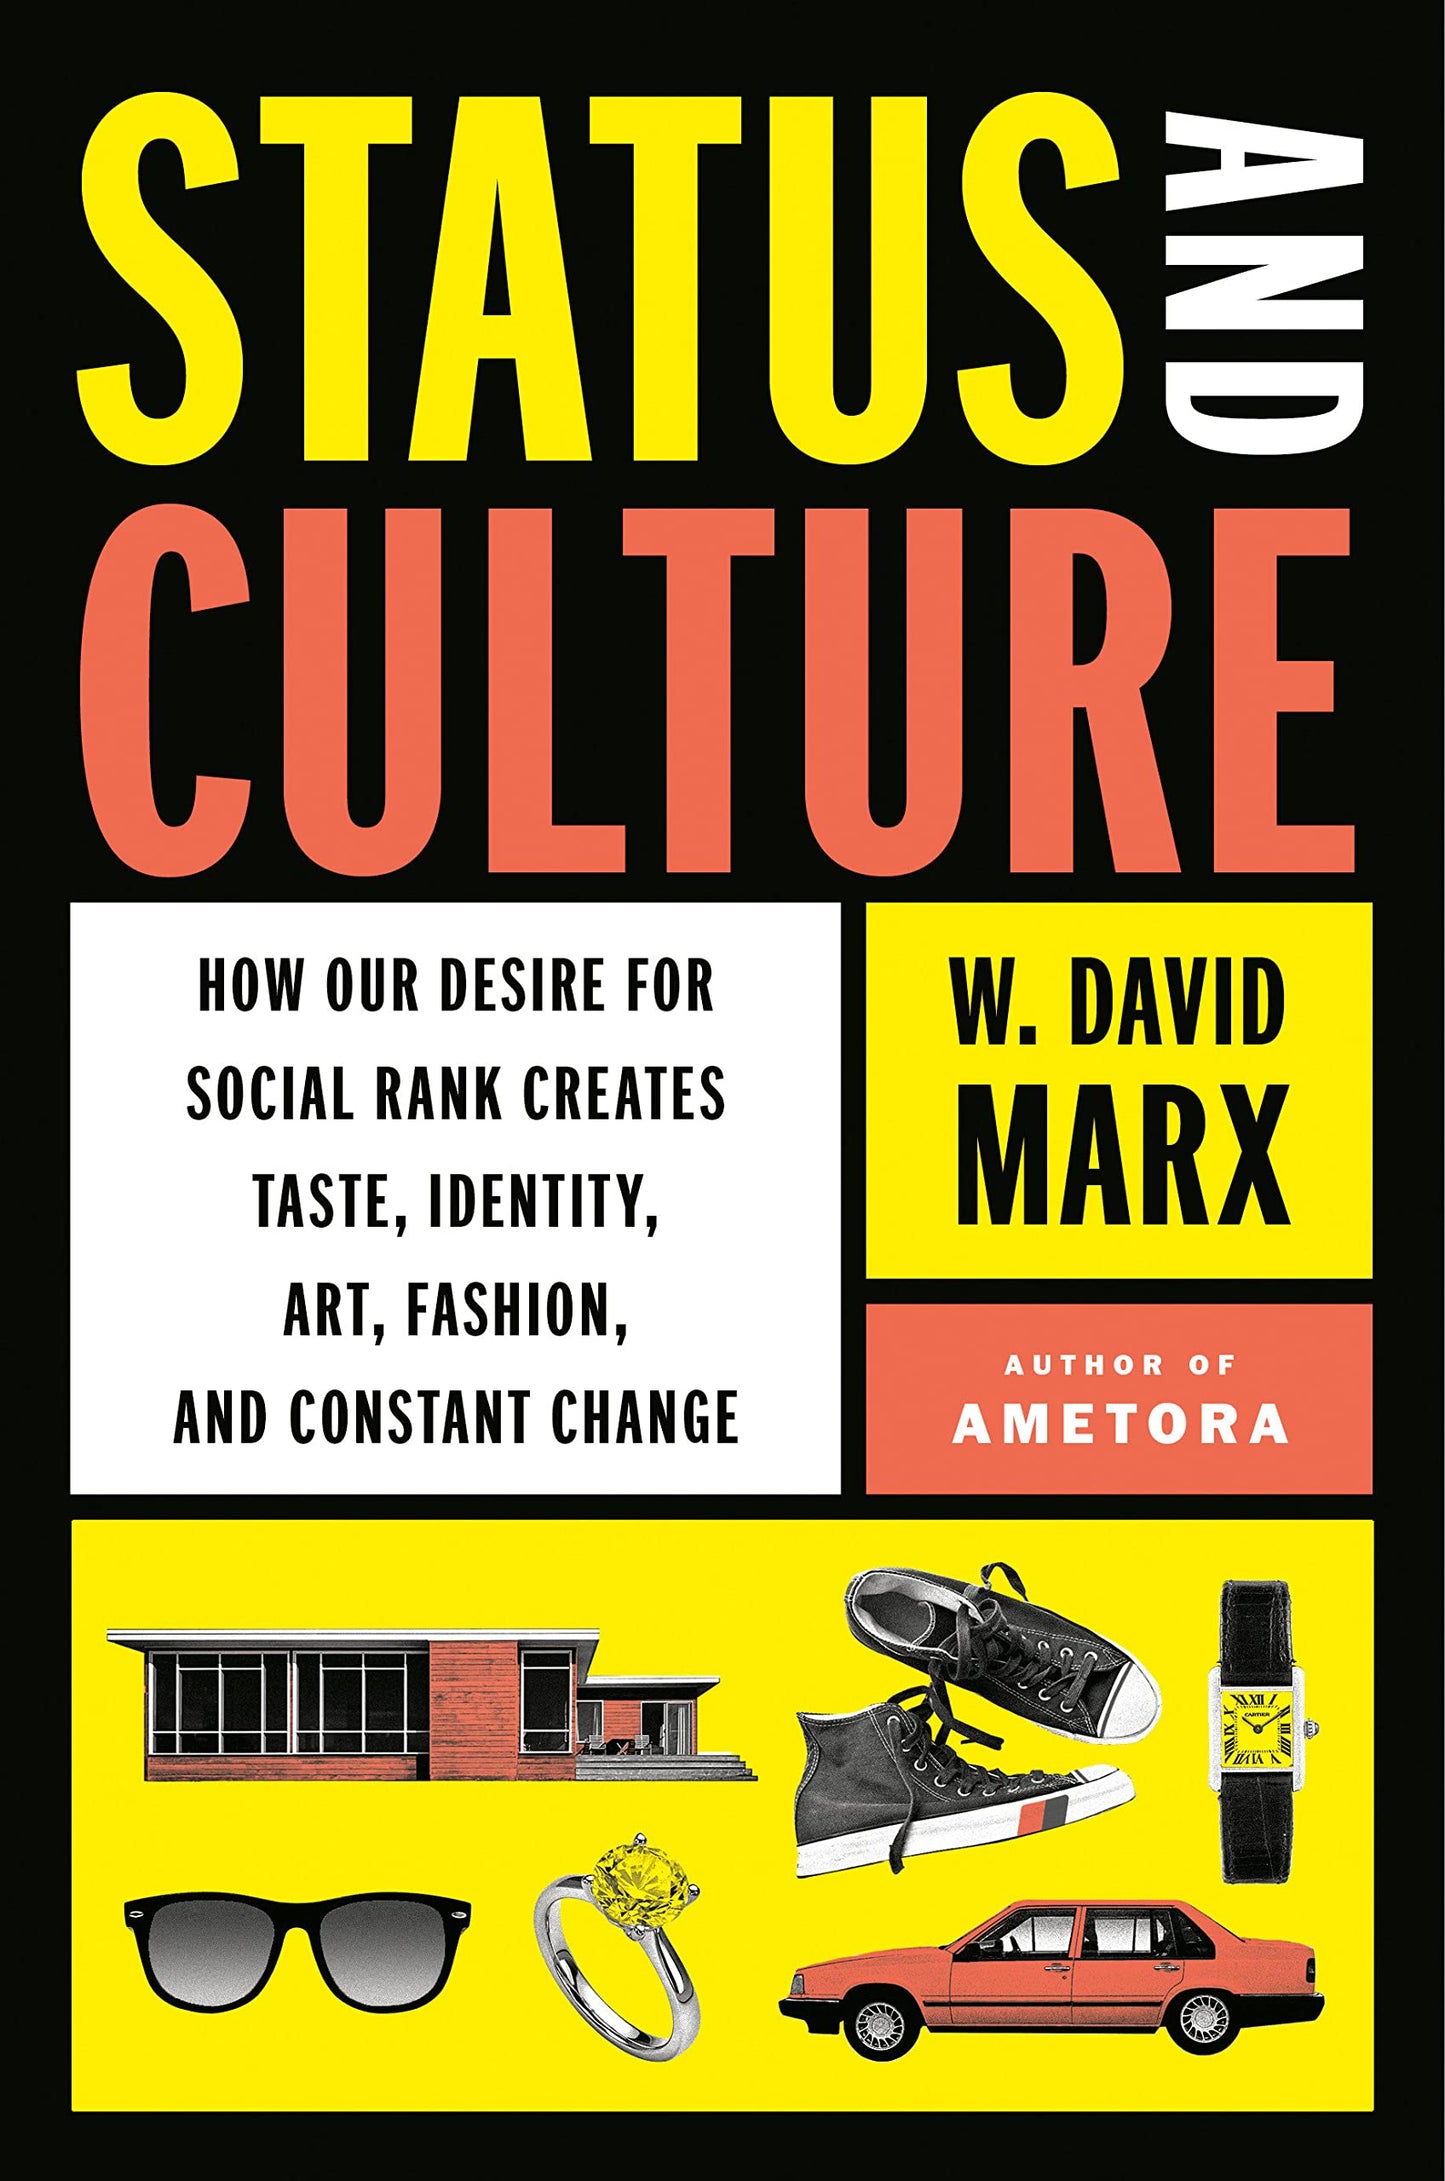 Status and Culture // Our Desire for Social Rank Creates Taste, Identity, Art, Fashion, and Constant Change